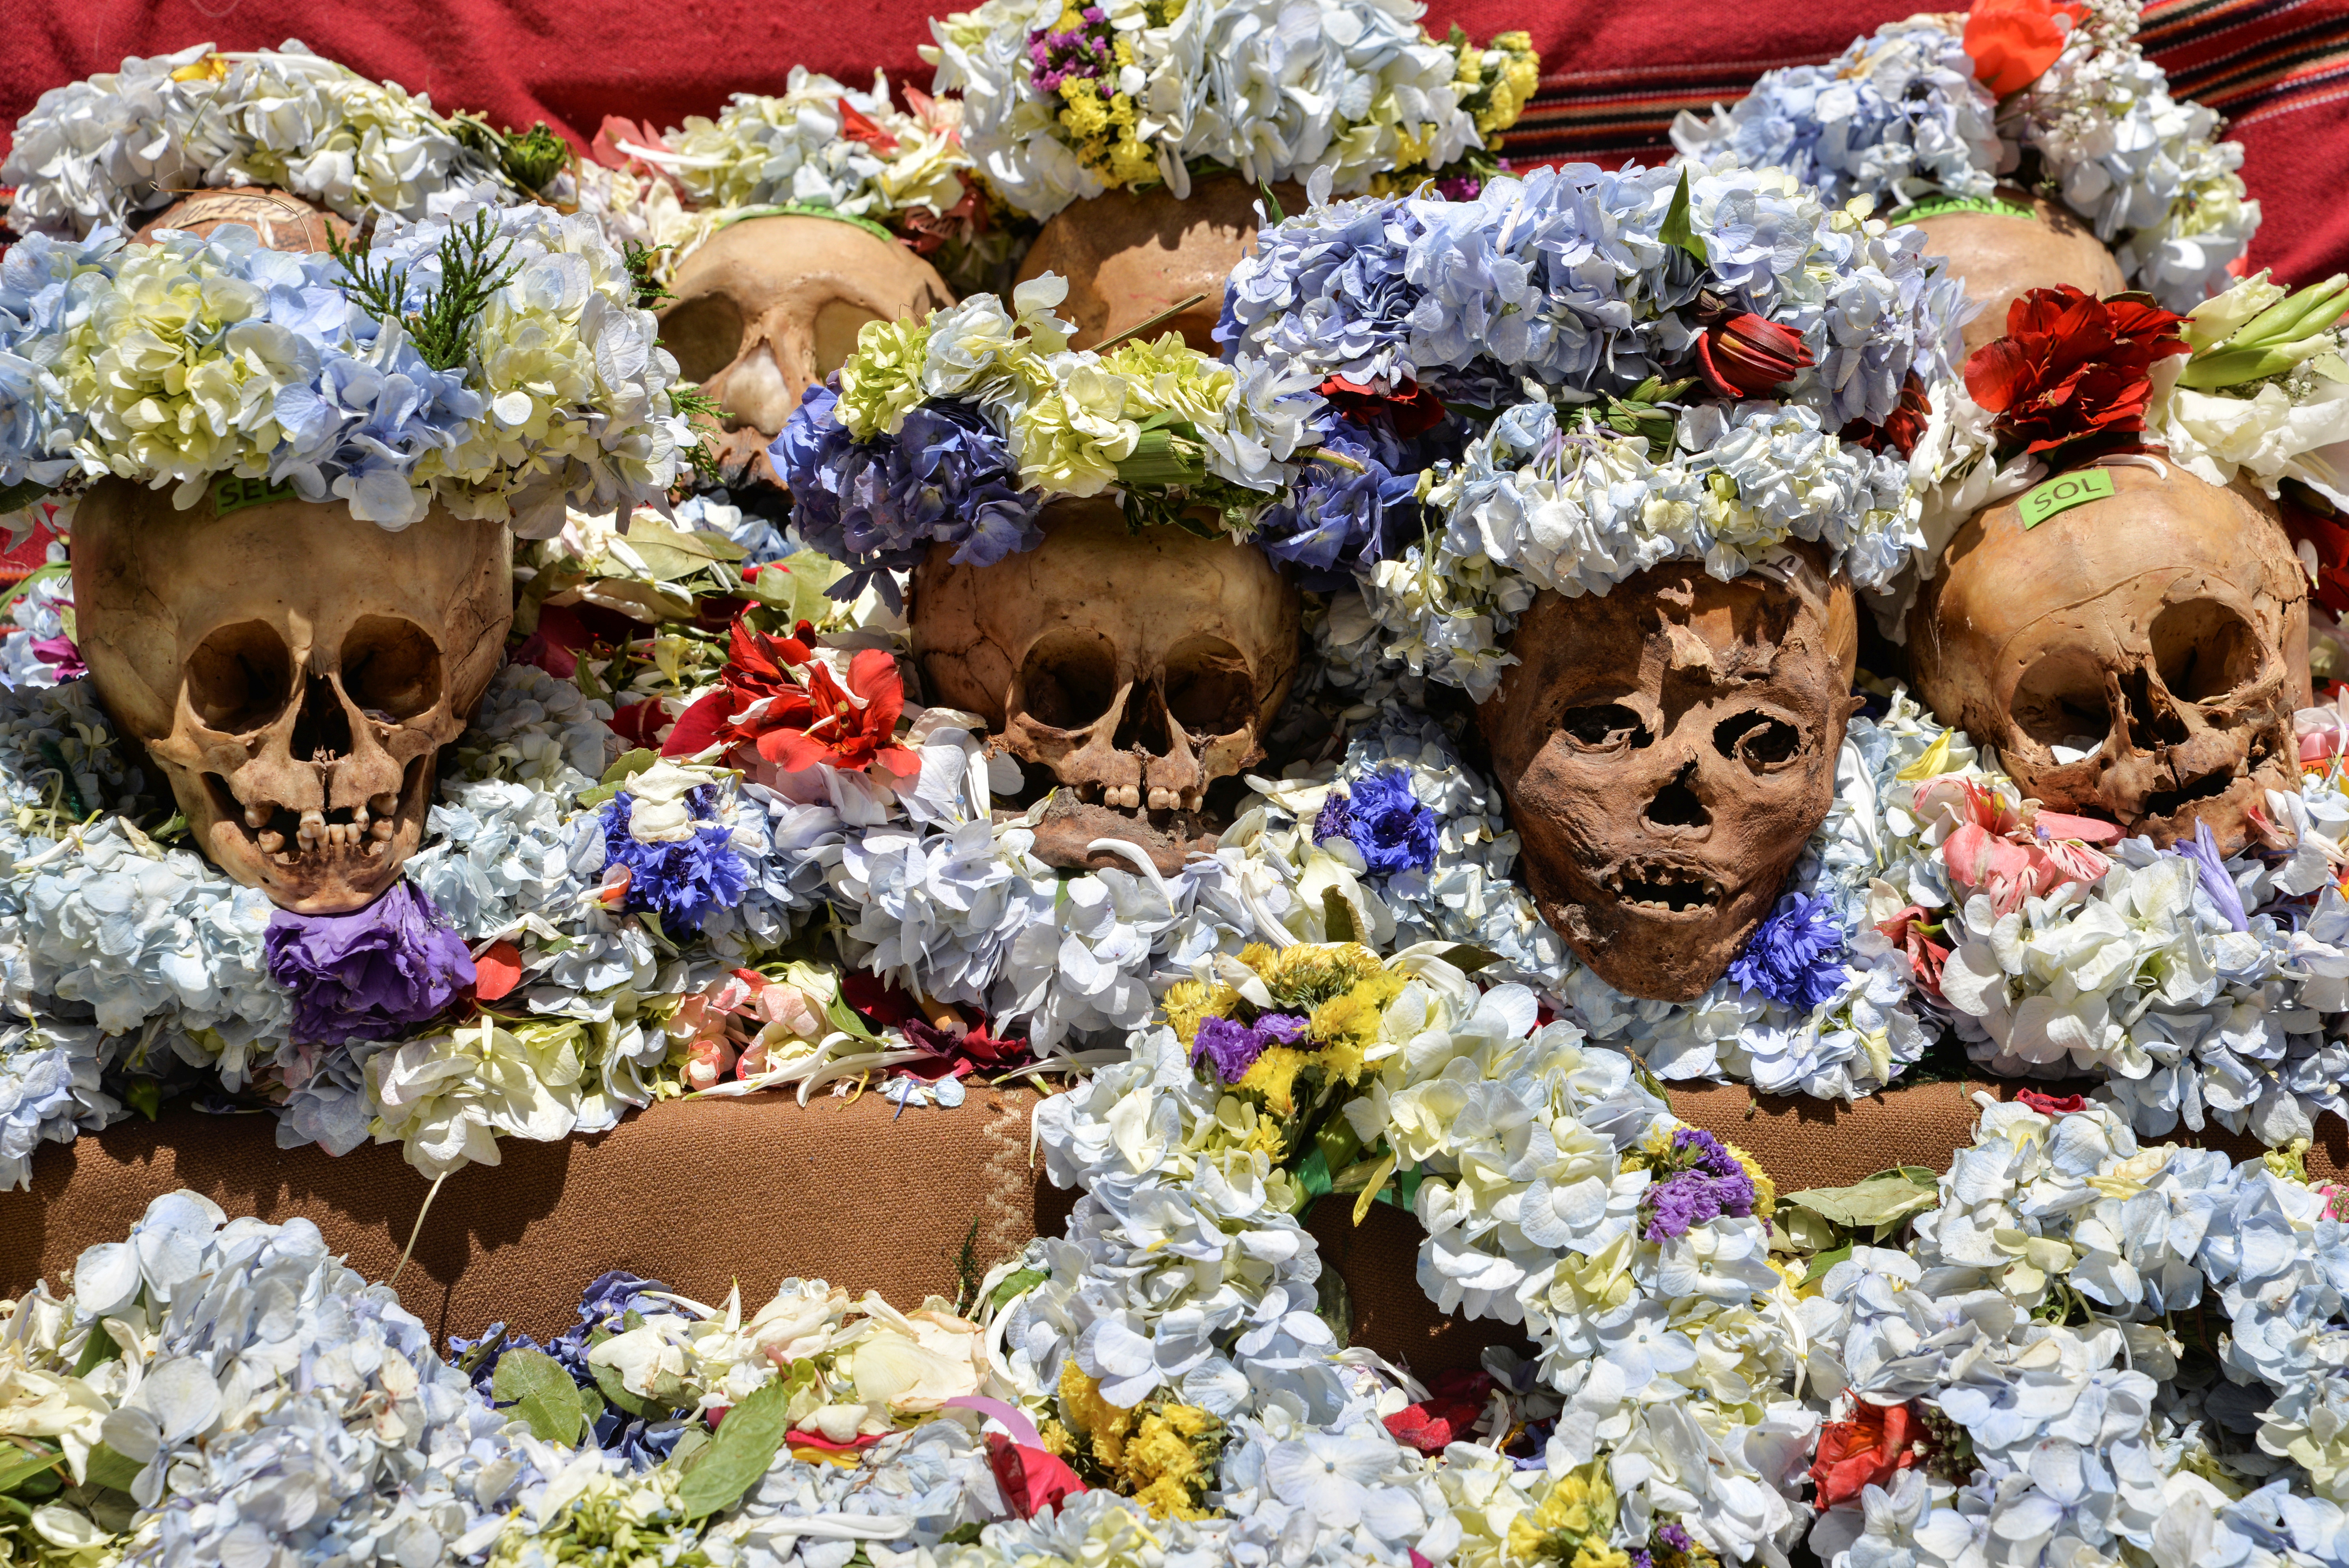 Skulls are decorated with flowers during the celebration of the Day of Skulls, a tradition rooted in ancient indigenous beliefs meant to bring good fortune and protection by honoring the dead, at a cemetery in La Paz, Bolivia, November 8, 2021. REUTERS/Sara Aliaga 